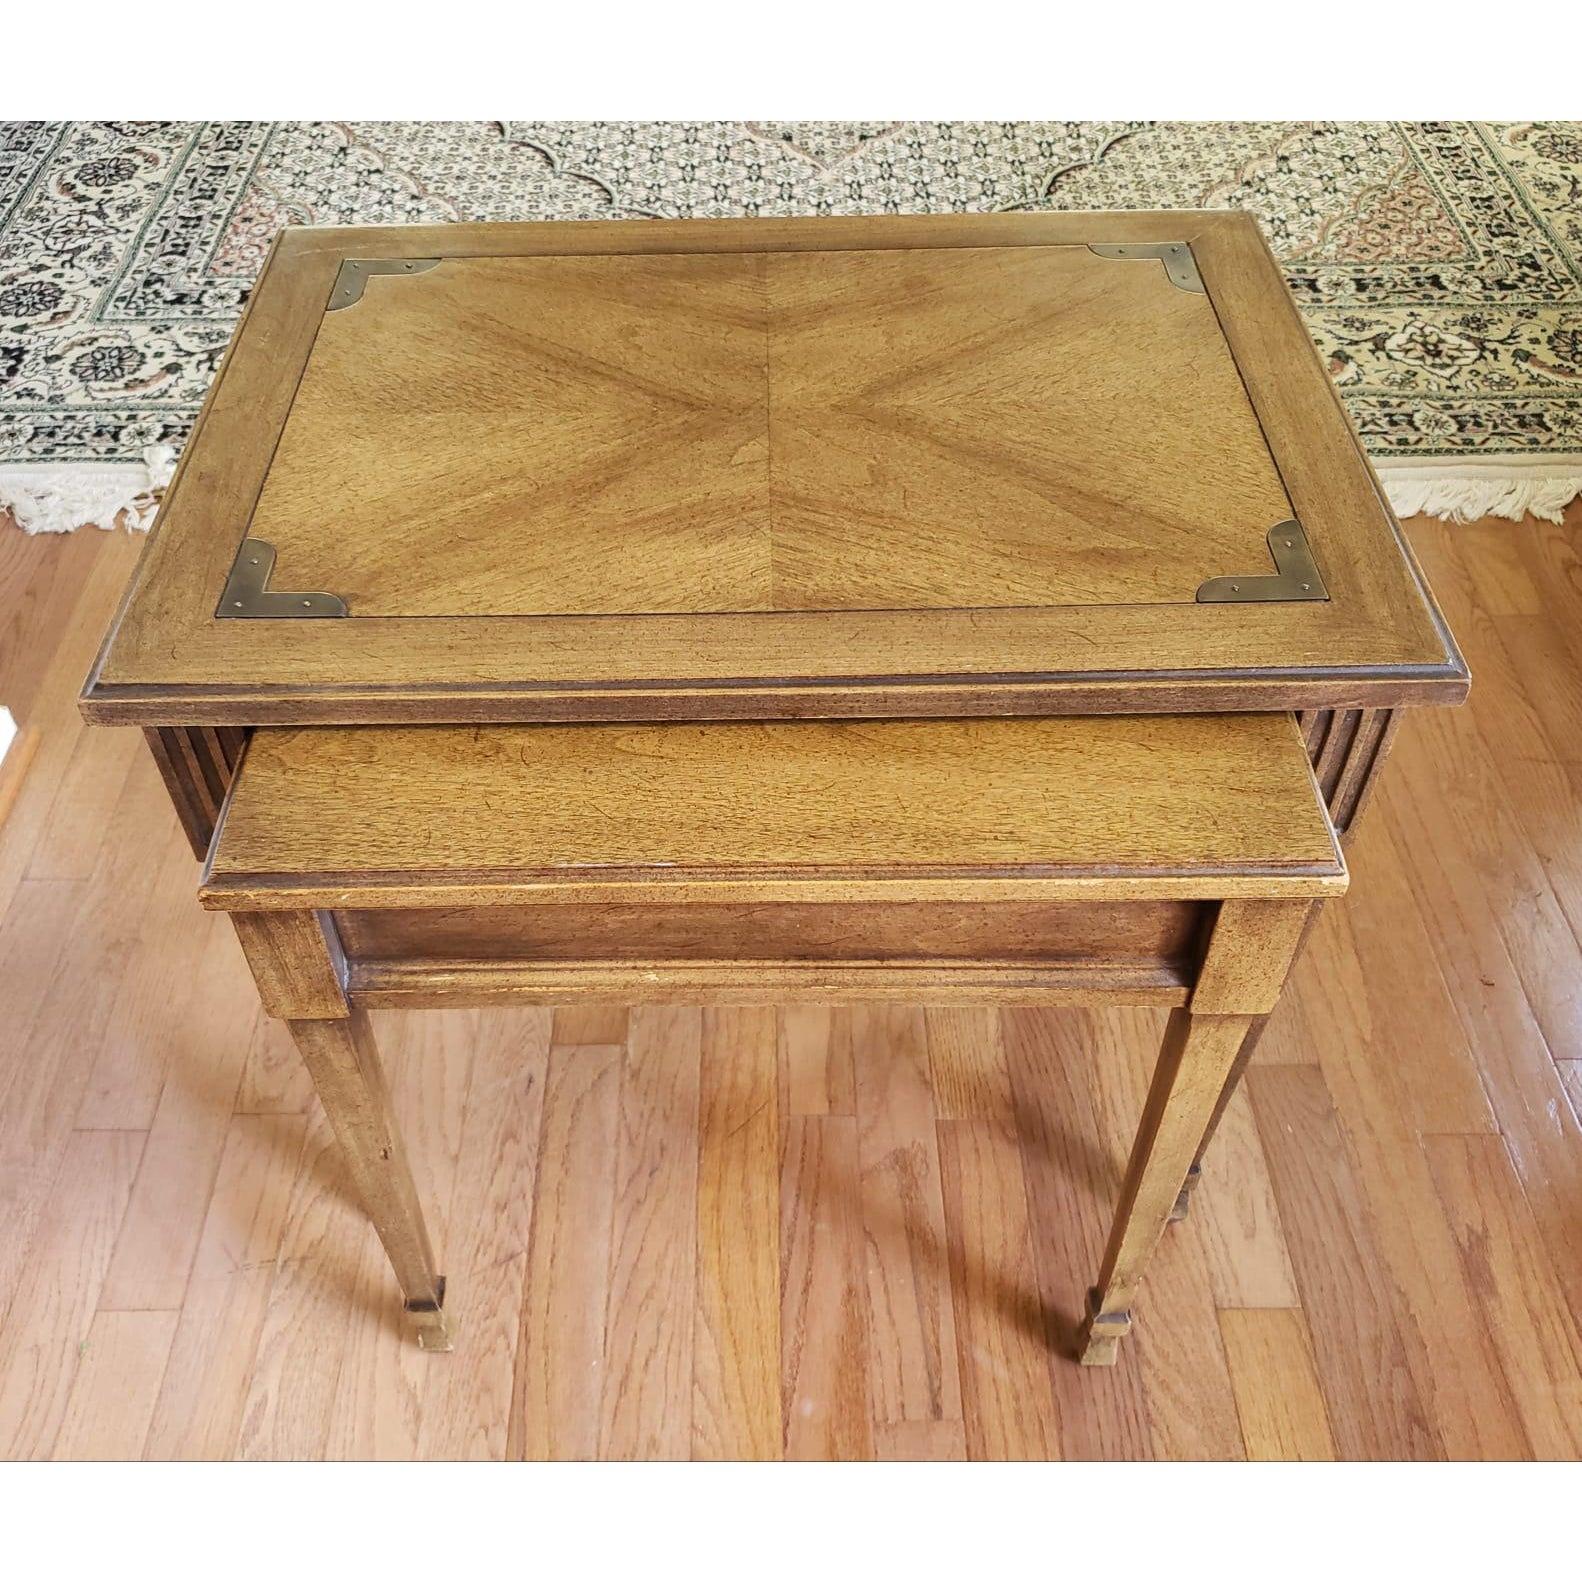 1970s Campaign Style Walnut Nesting Tables, Set of 2 For Sale 4